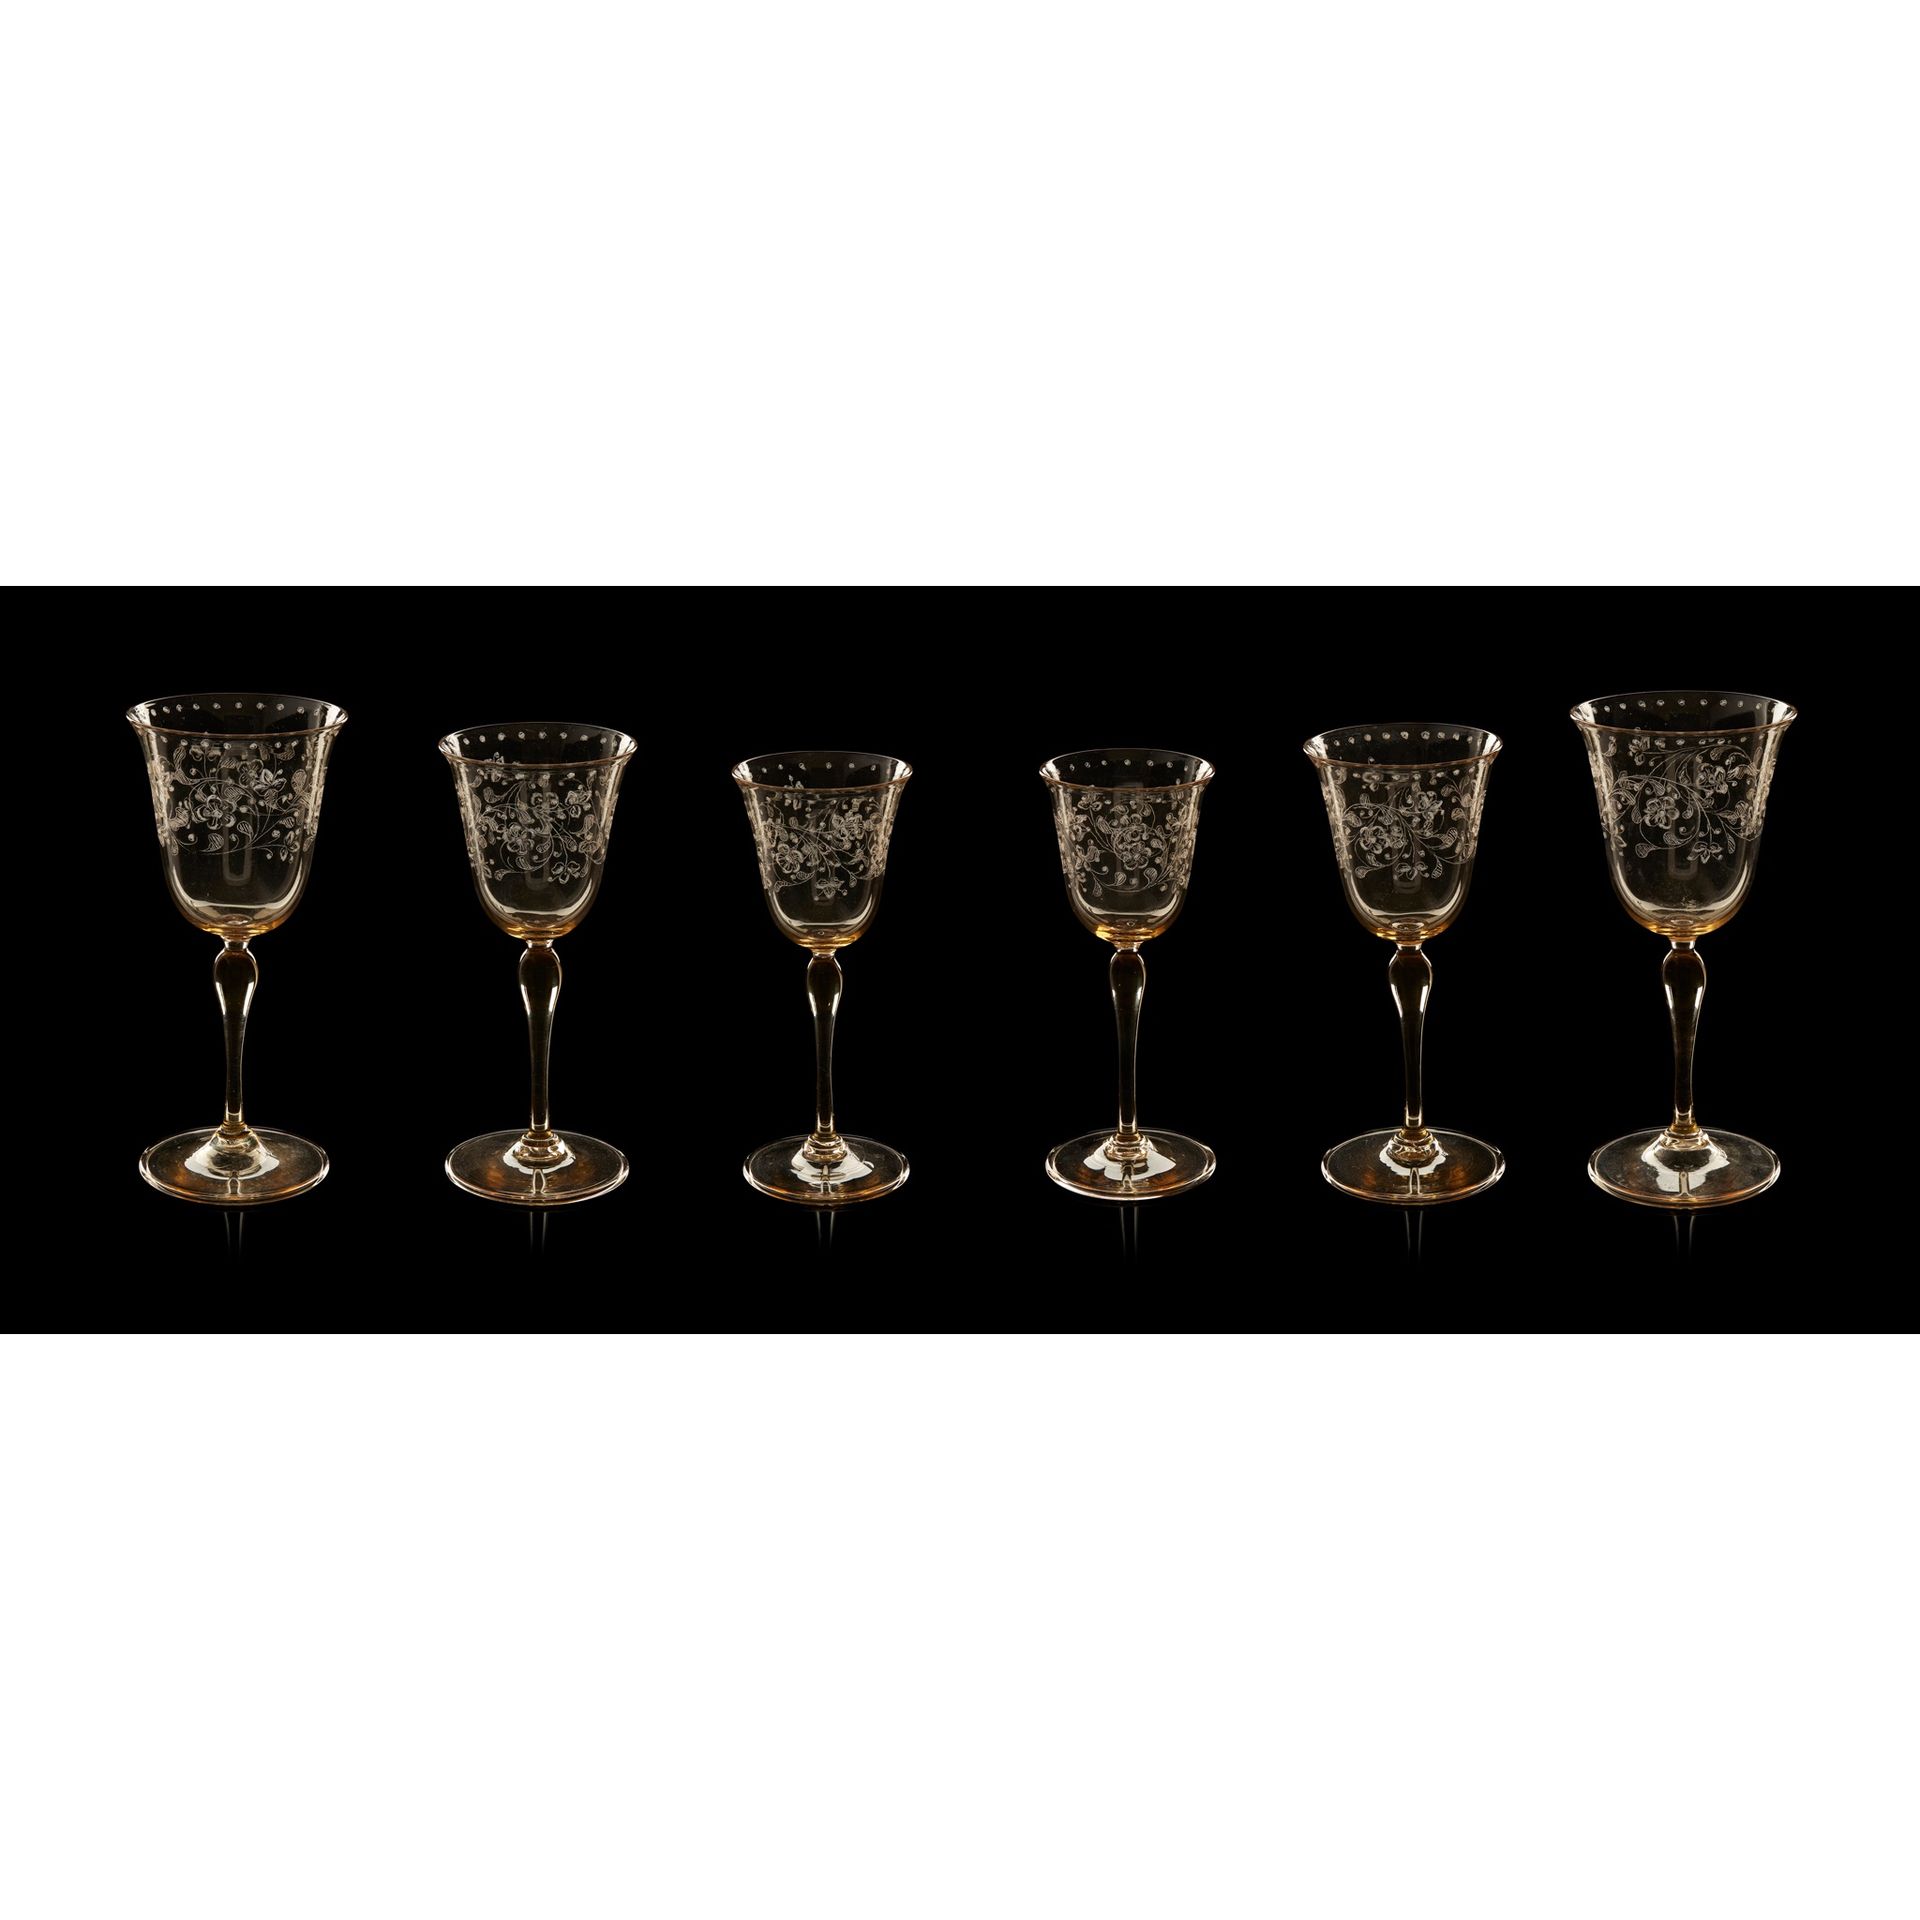 MANNER OF JAMES POWELL & SONS PART SUITE OF STEMMED DRINKING GLASSES vidrio colo&hellip;